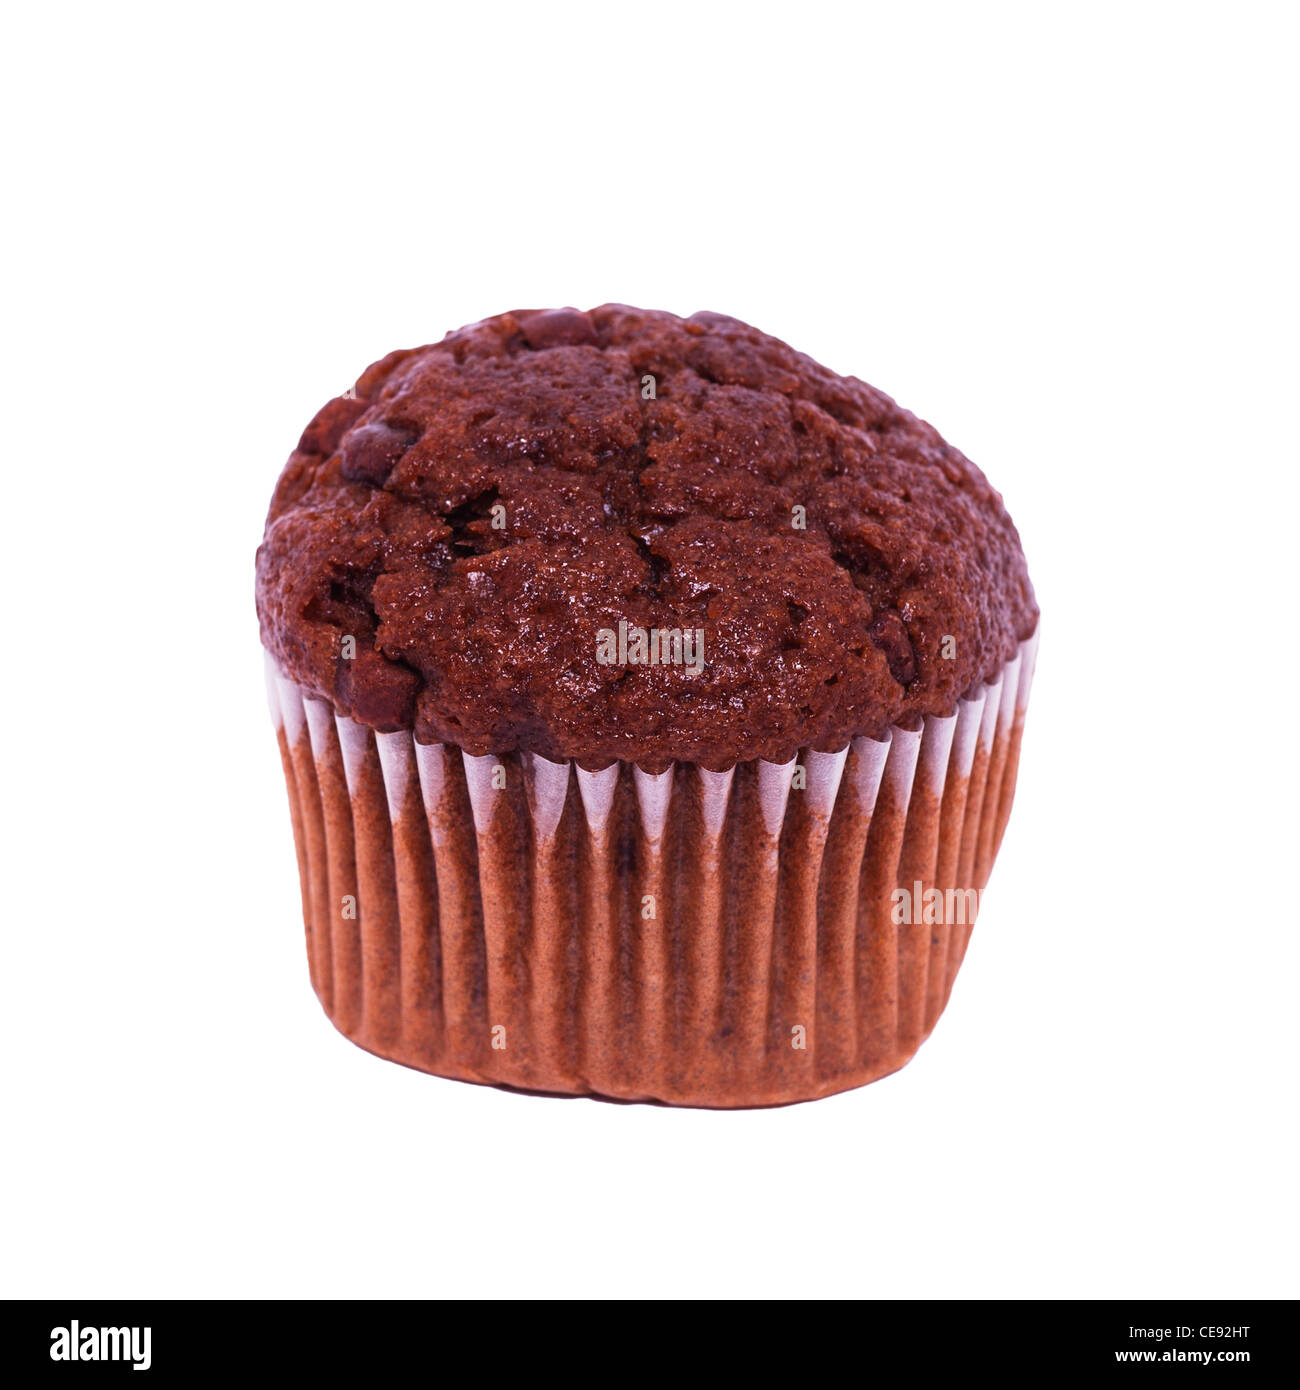 A double chocolate muffin cup cake on a white background Stock Photo